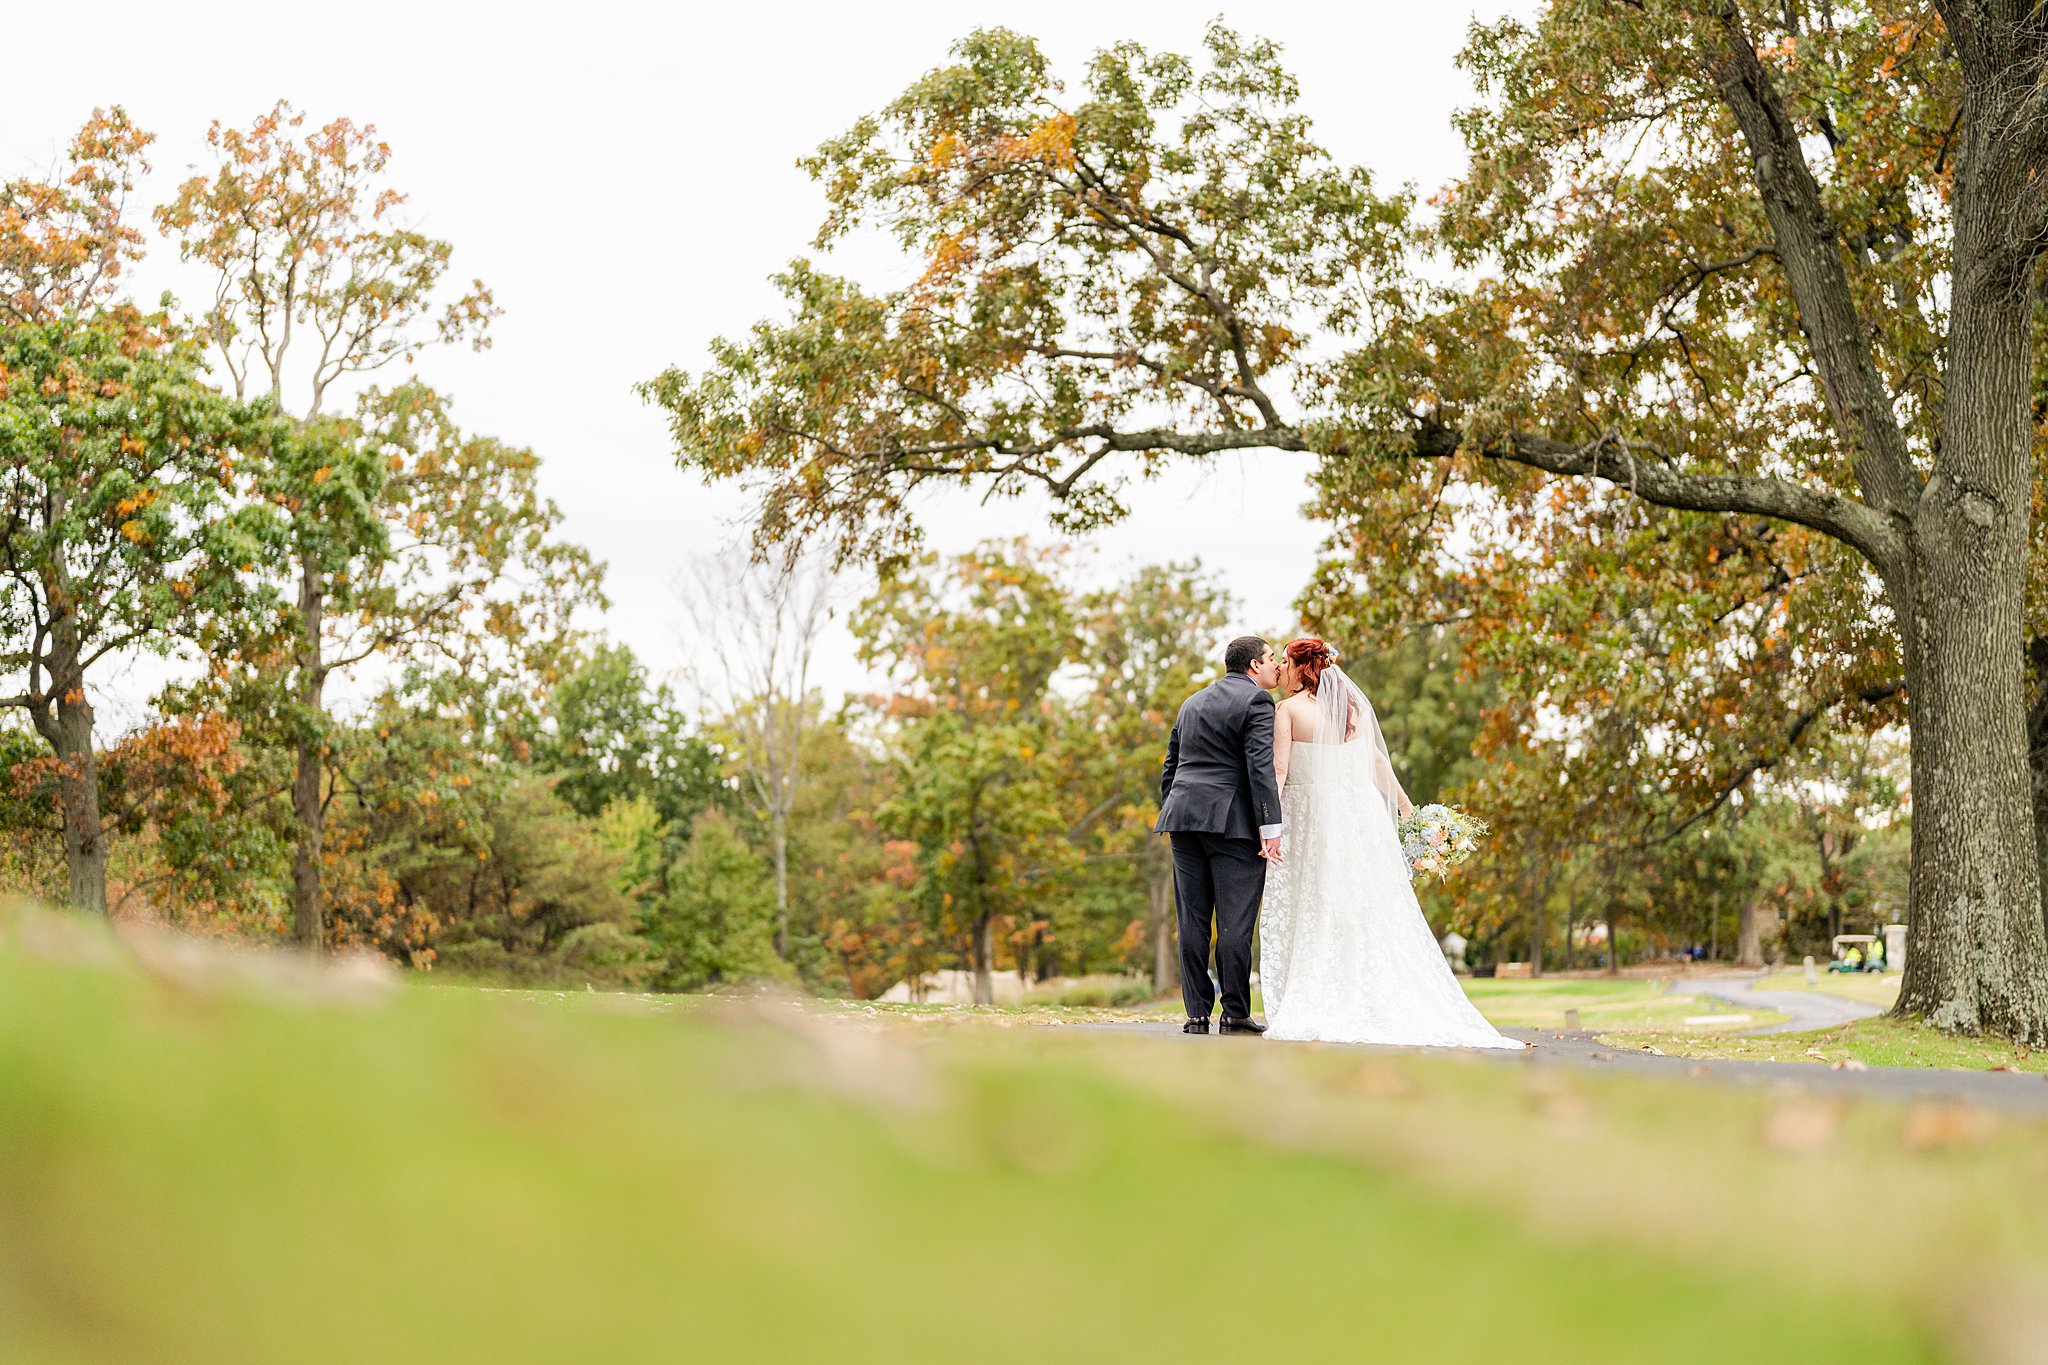 Newlyweds kiss under a tall tree while walking down a park path